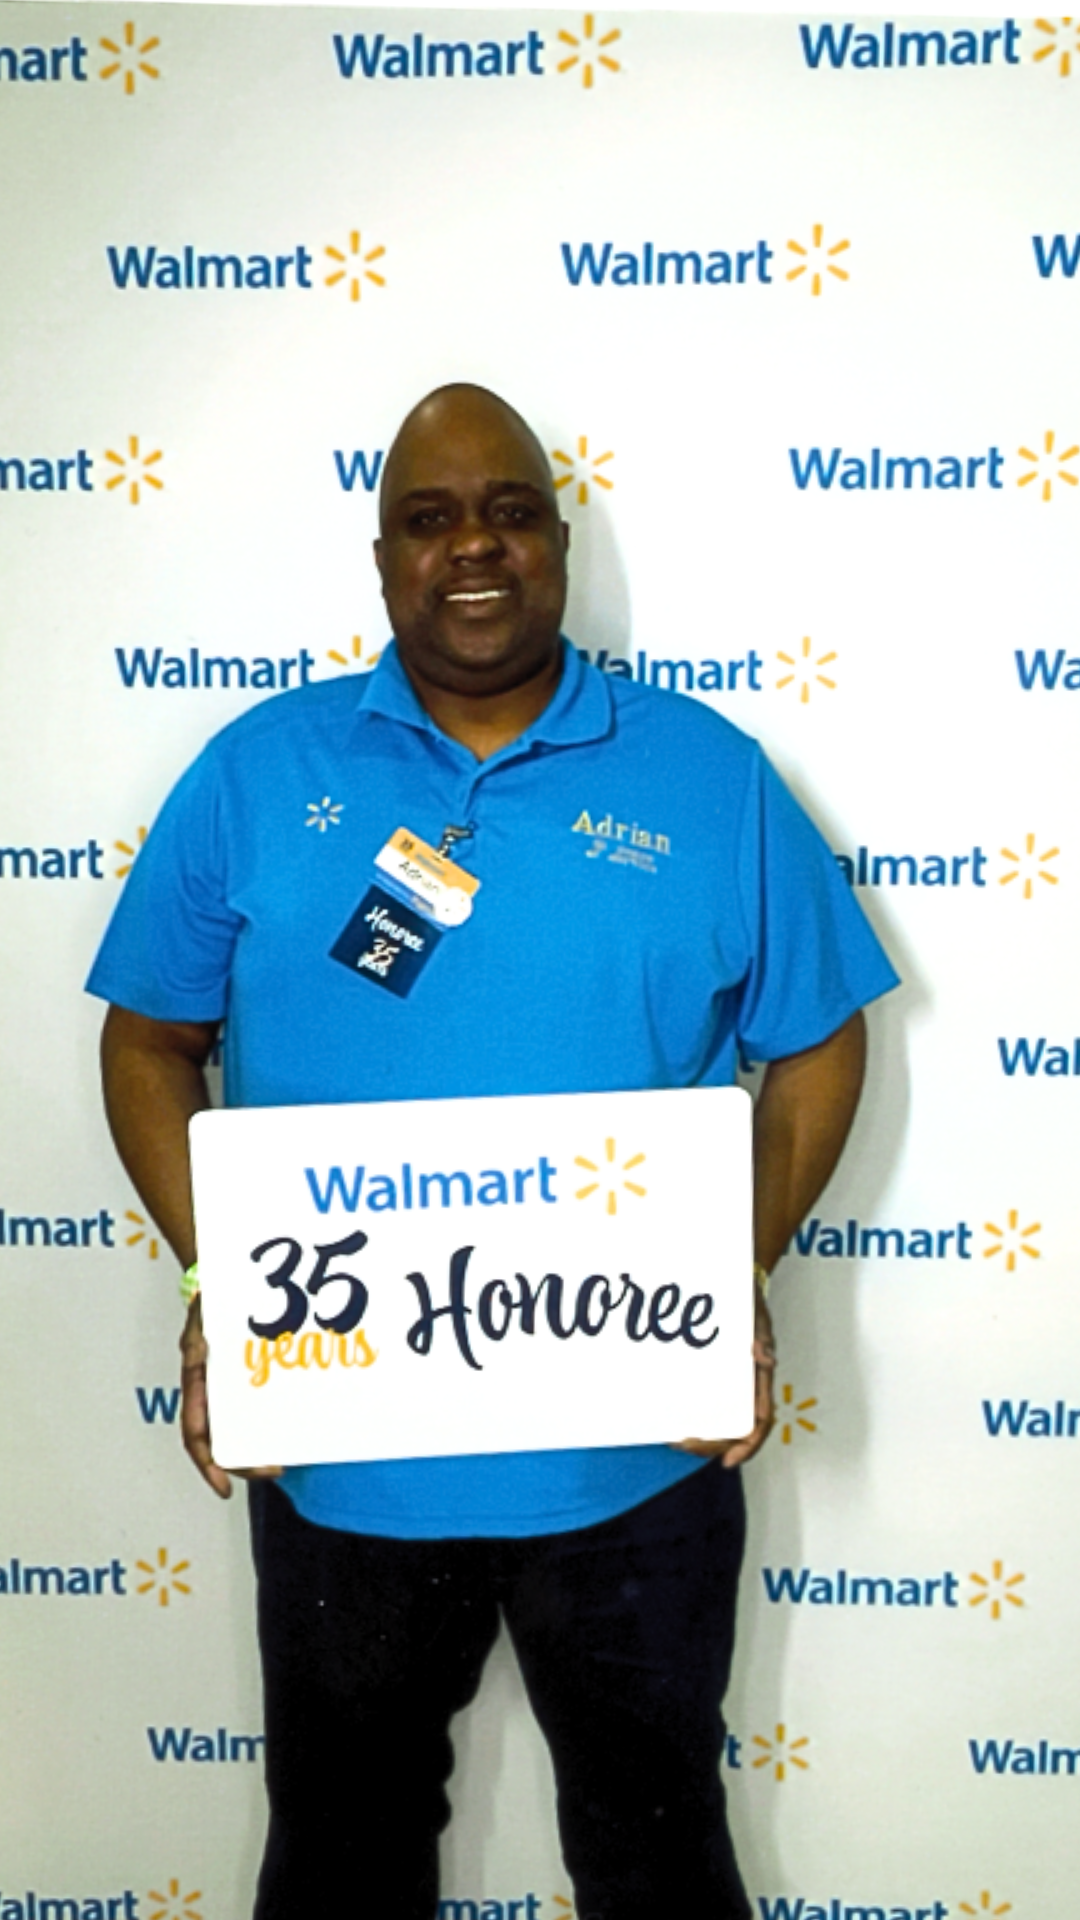  Adrian Allen Honored for 35 Years at Walmart 